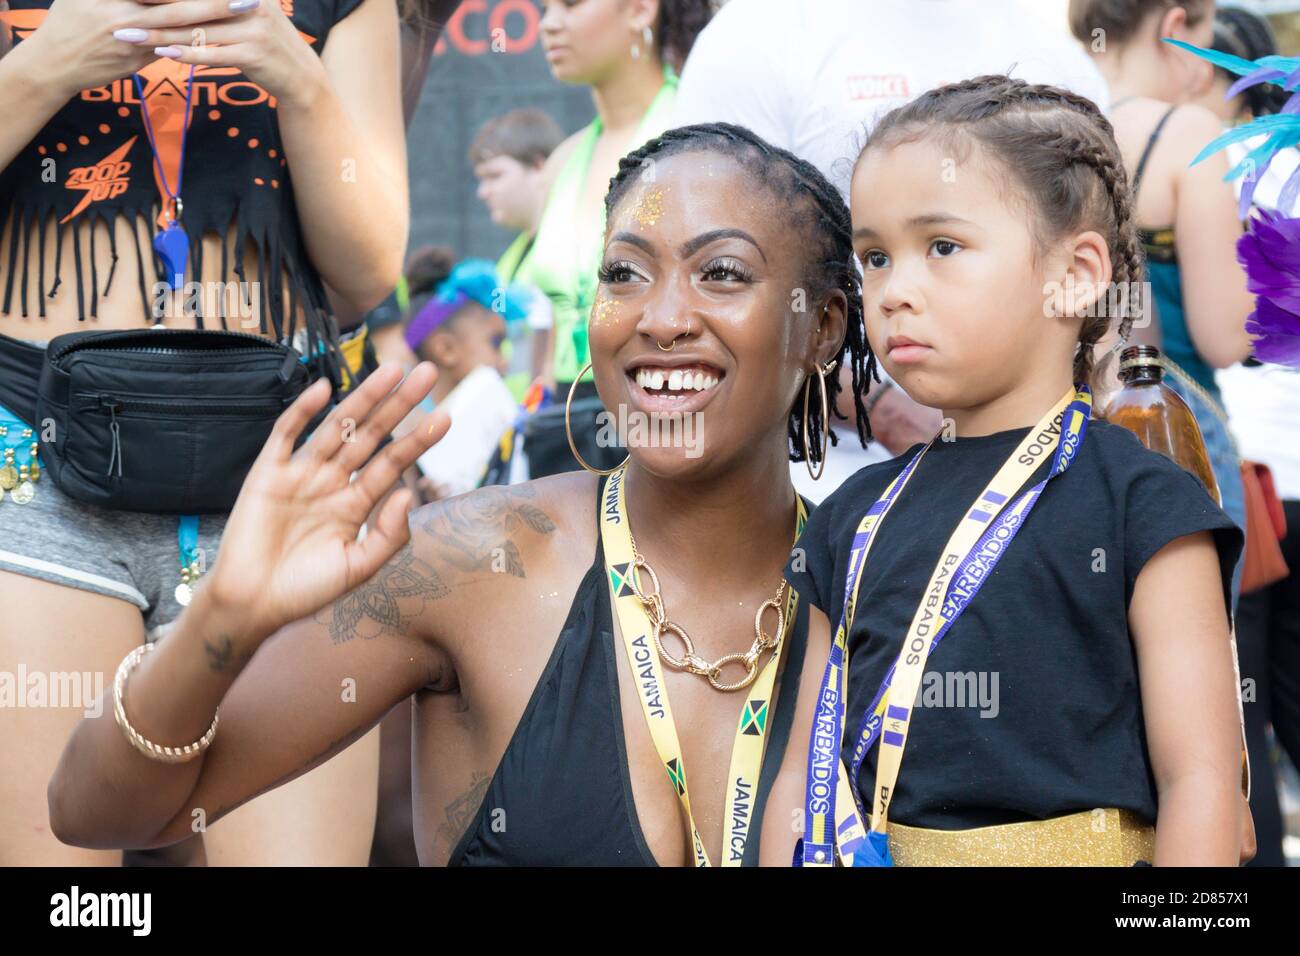 London, United Kingdom, August 25th 2019:-An adult and child reveller at the Notting Hill Carnival in West London, the Notting Hill Carnival is Europe Stock Photo